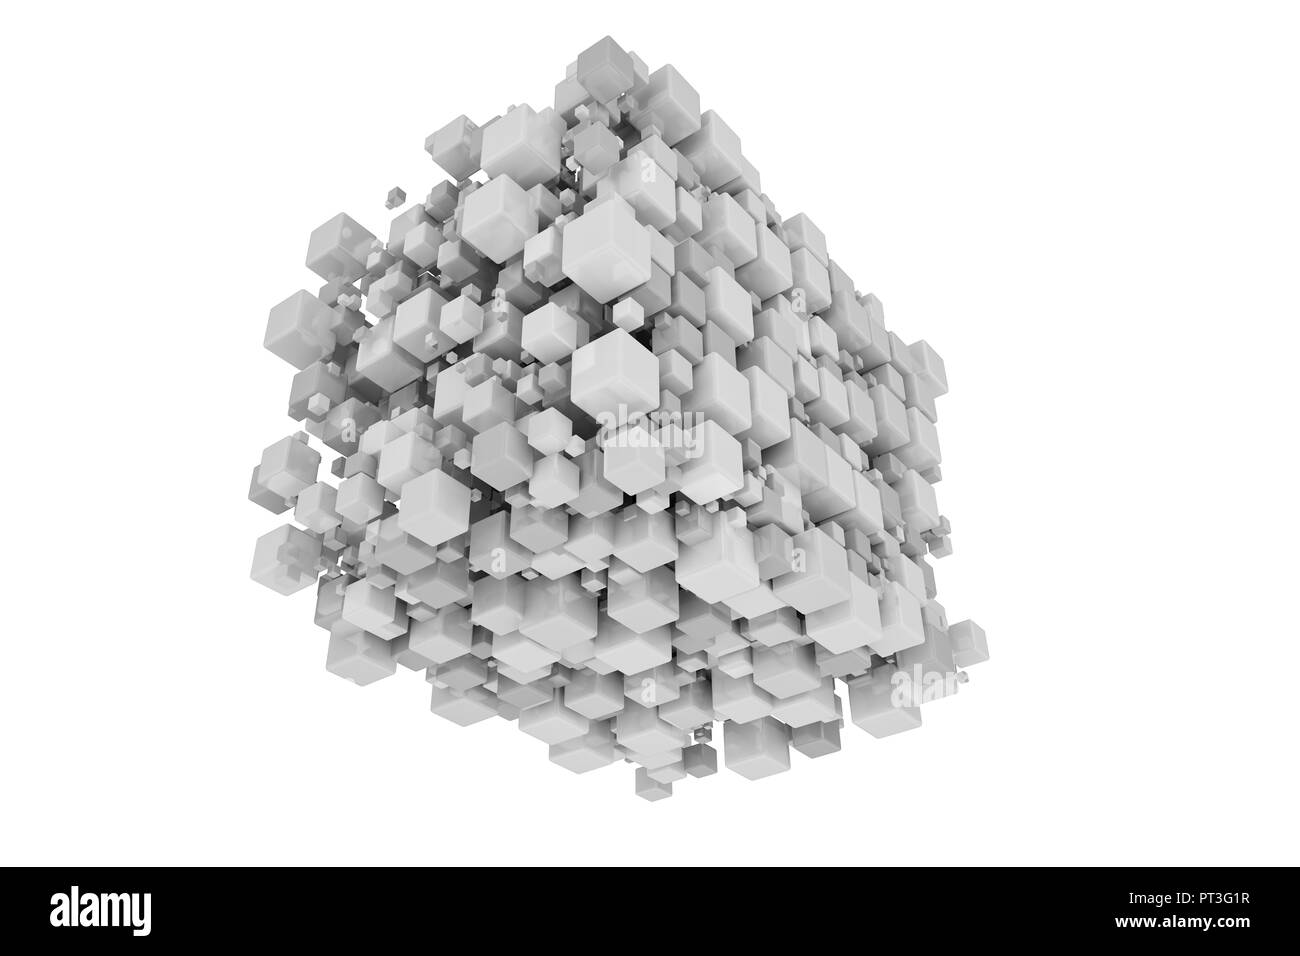 Cluster of 3d cubes in different sizes isolated on white background Stock Photo